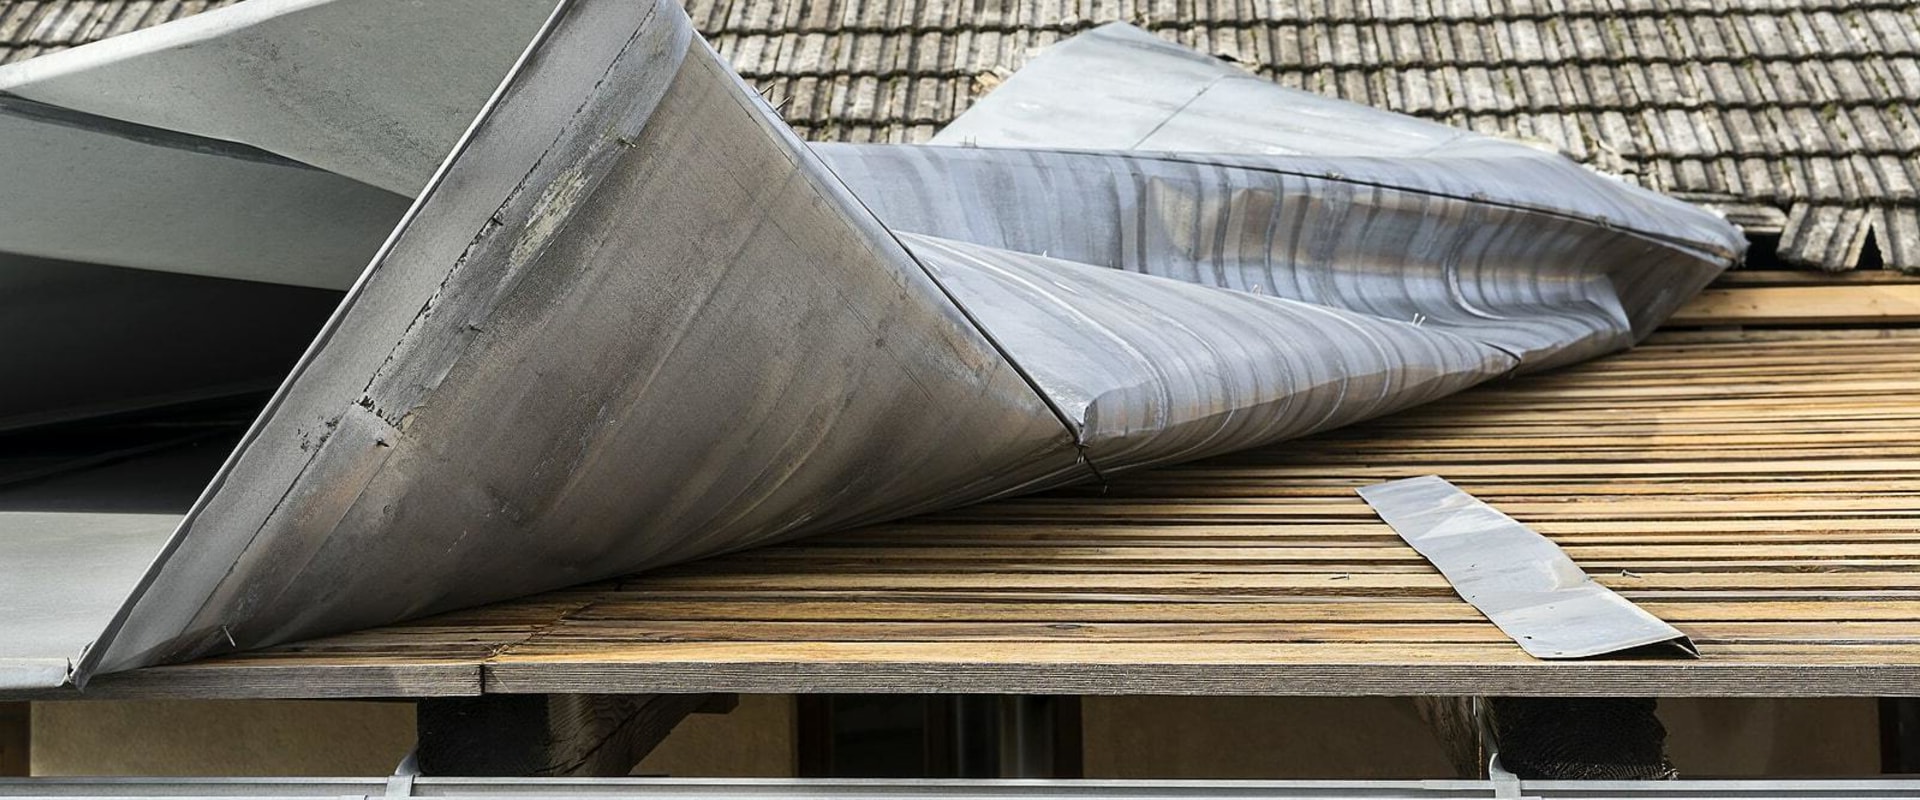 What are the disadvantages of having a metal roof?